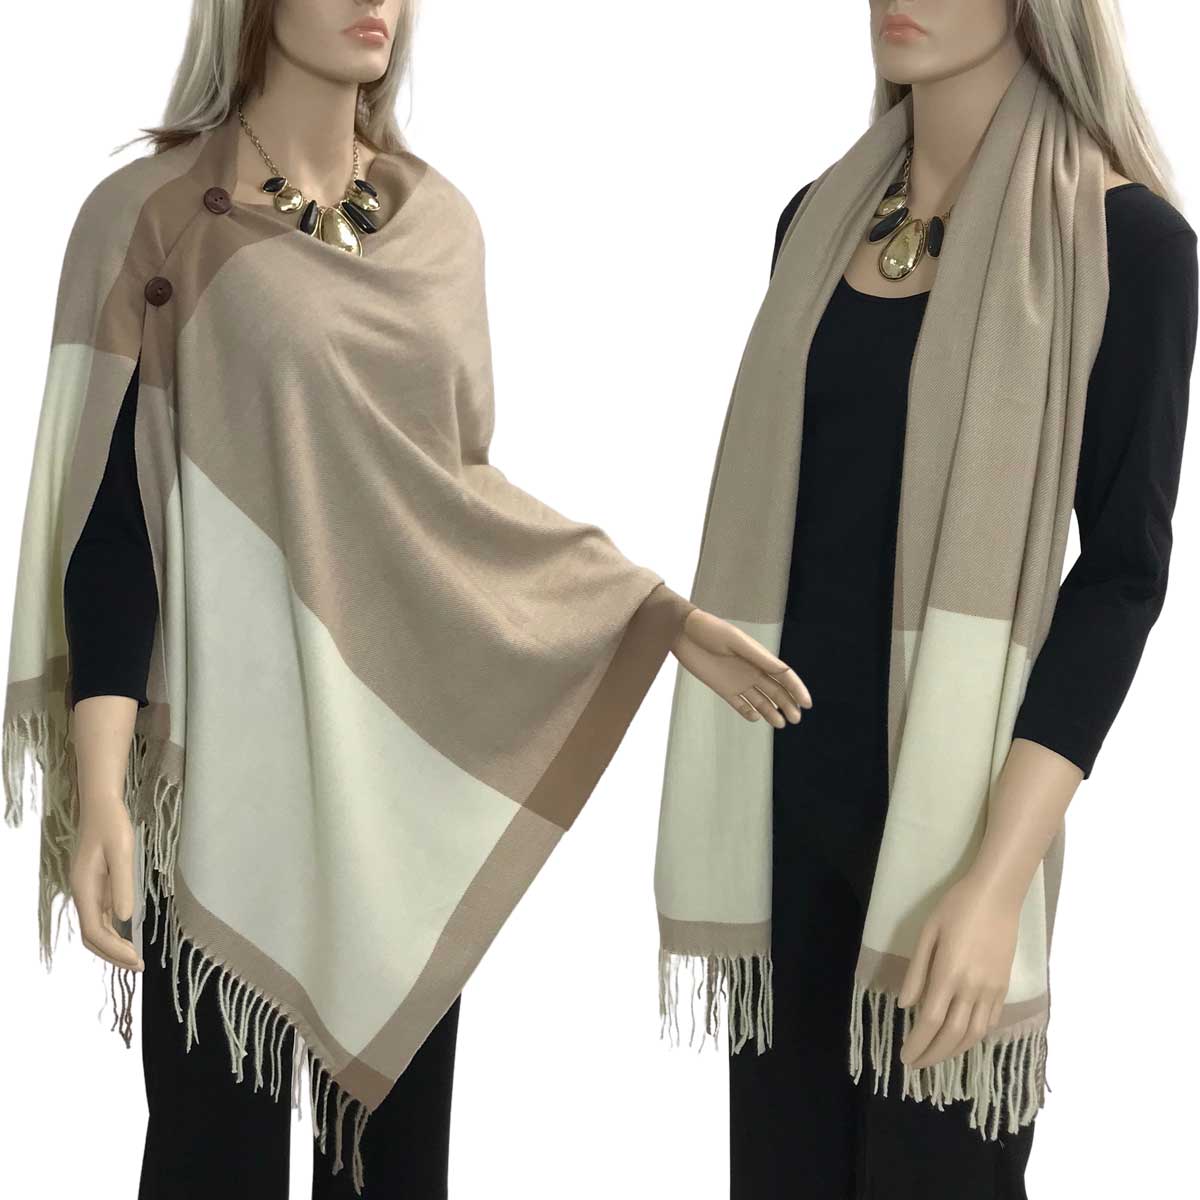 624 - Cashmere Feel Wooden Button Shawls  TWO TONE BLACK-GREY with Black Wooden Buttons  - 